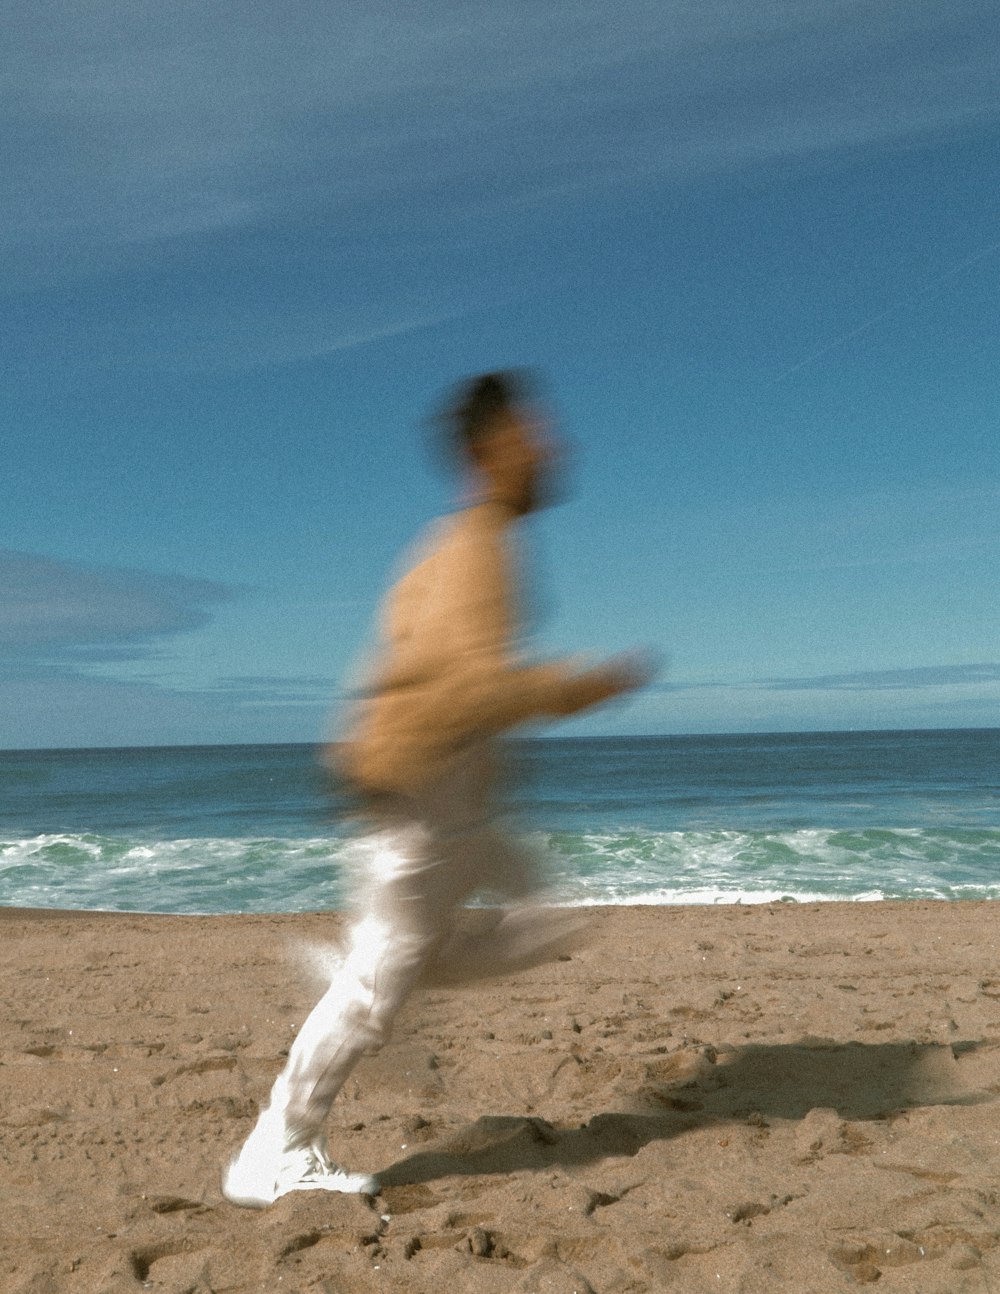 a blurry photo of a man running on the beach